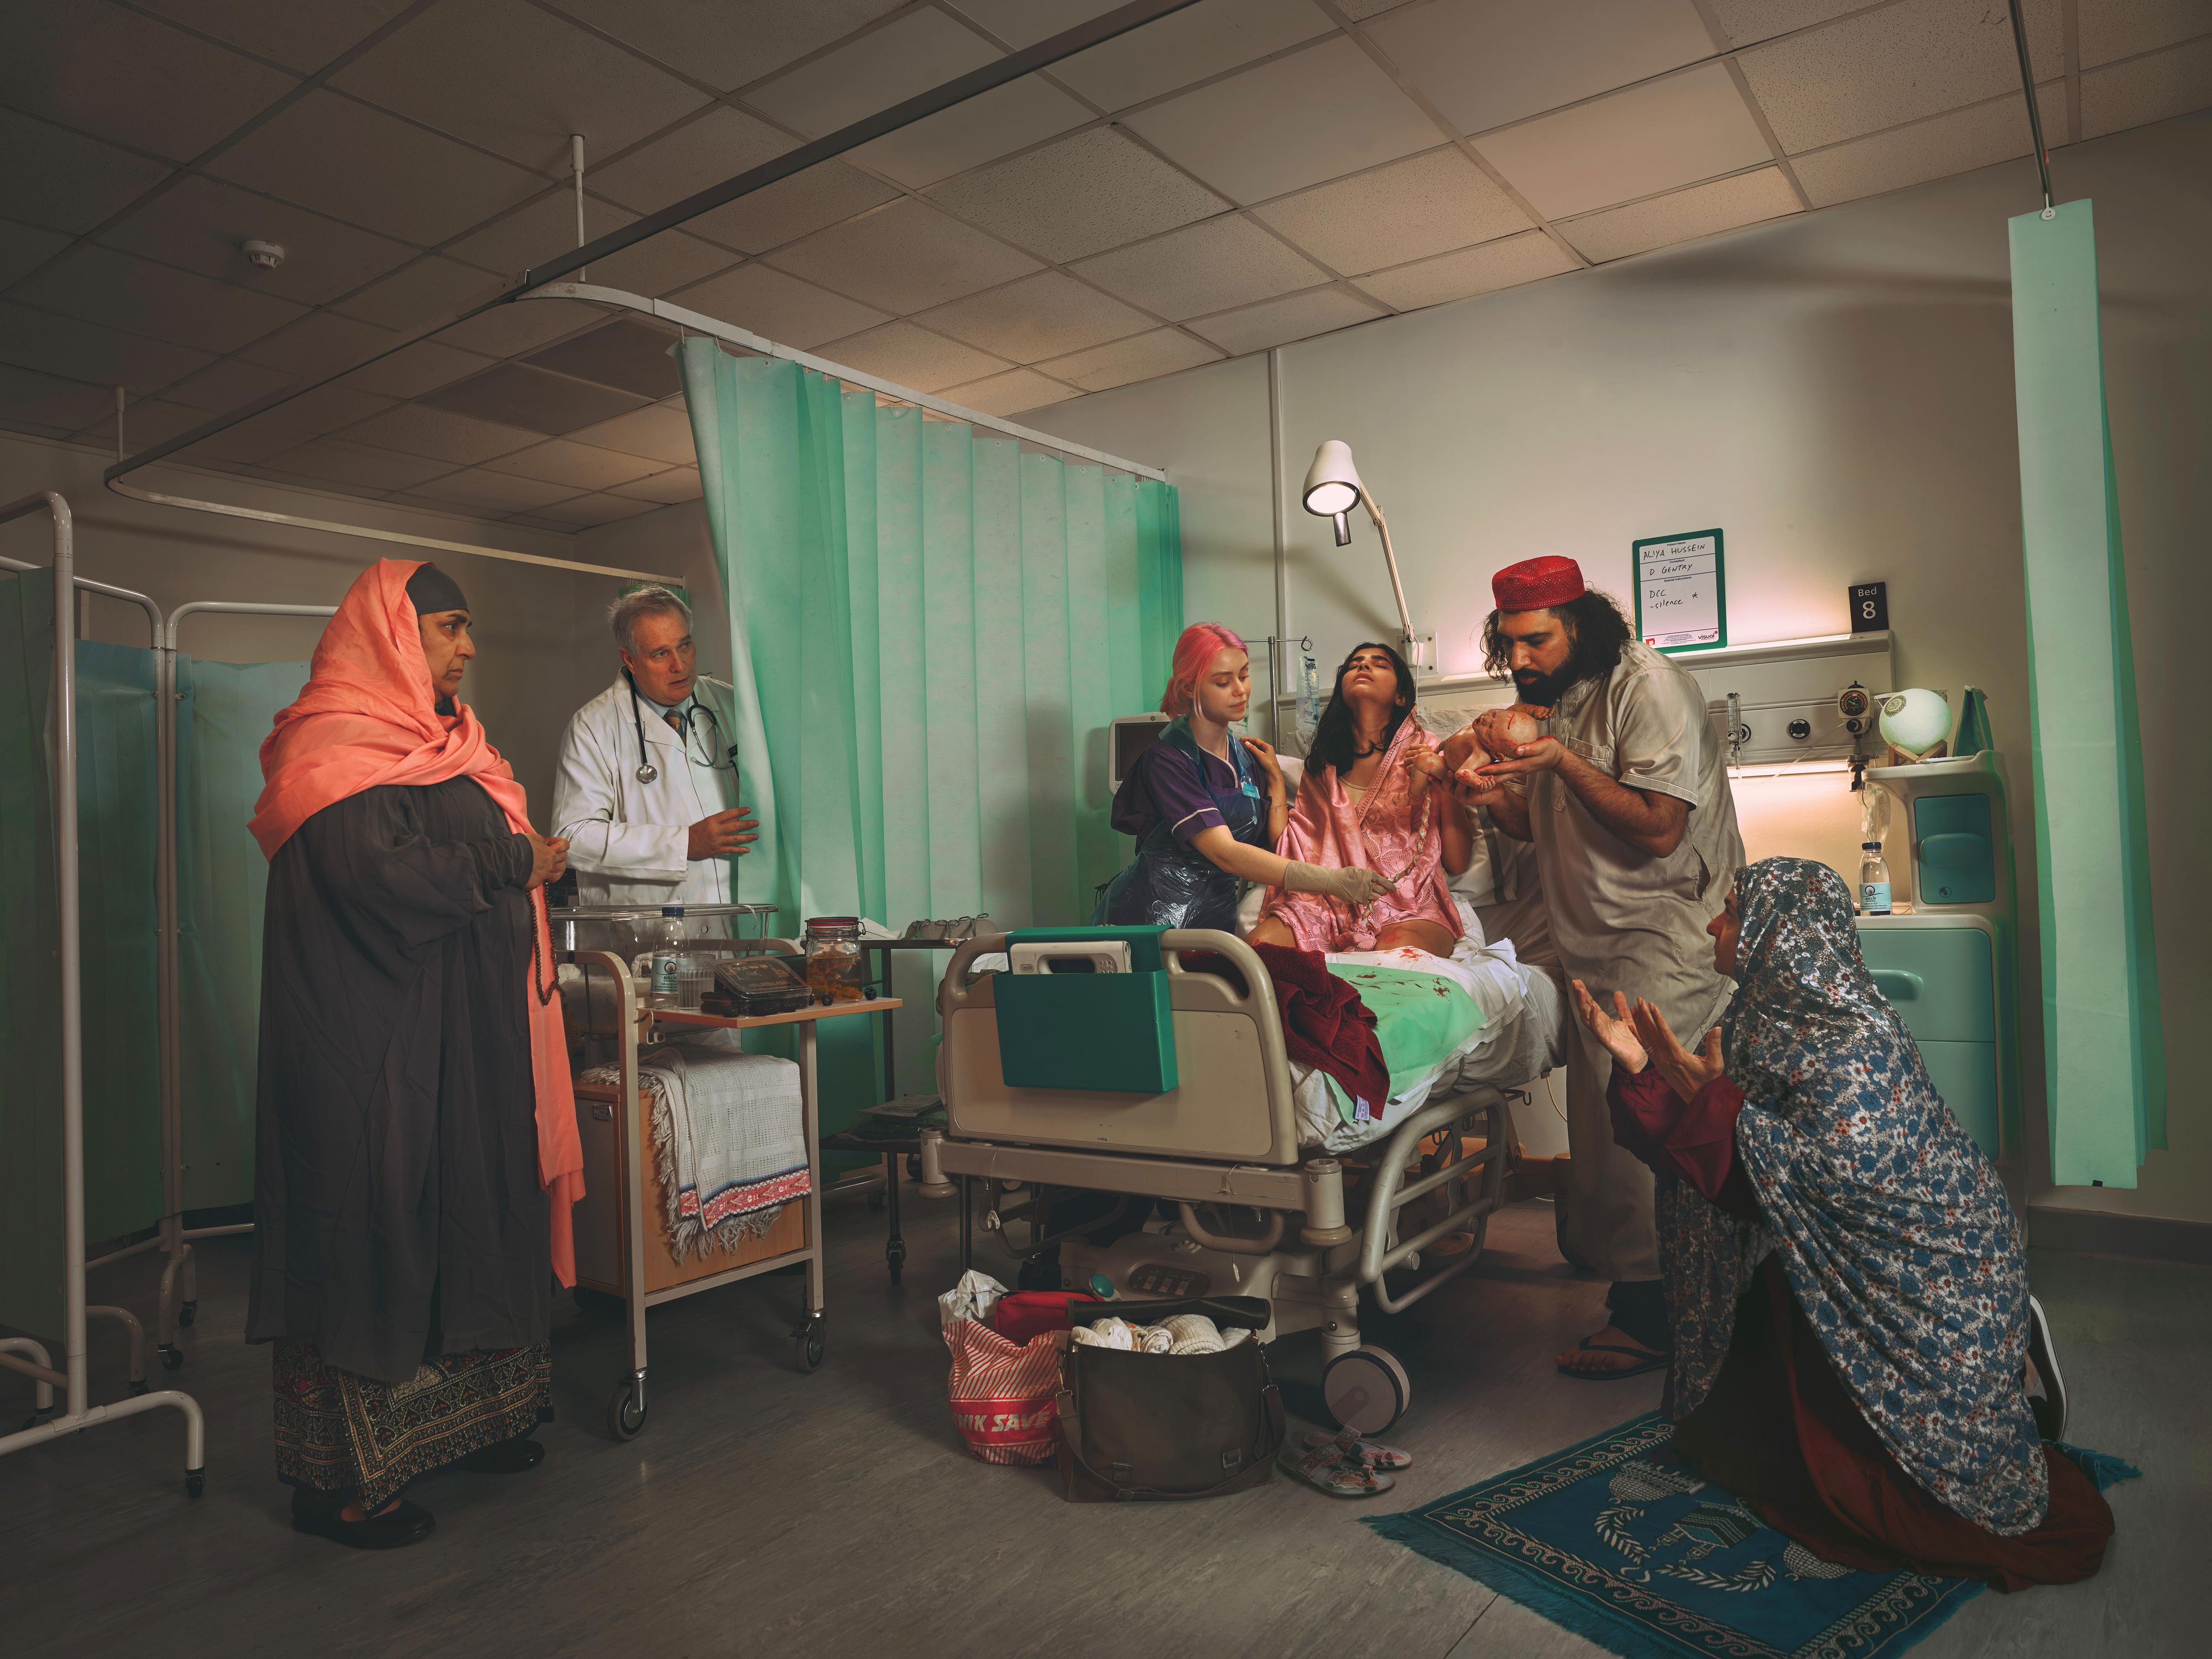 Natalie Lennard Color Photograph - Call to Prayer - Staged Photograph of Muslim Birth Scene (Green+Peach)